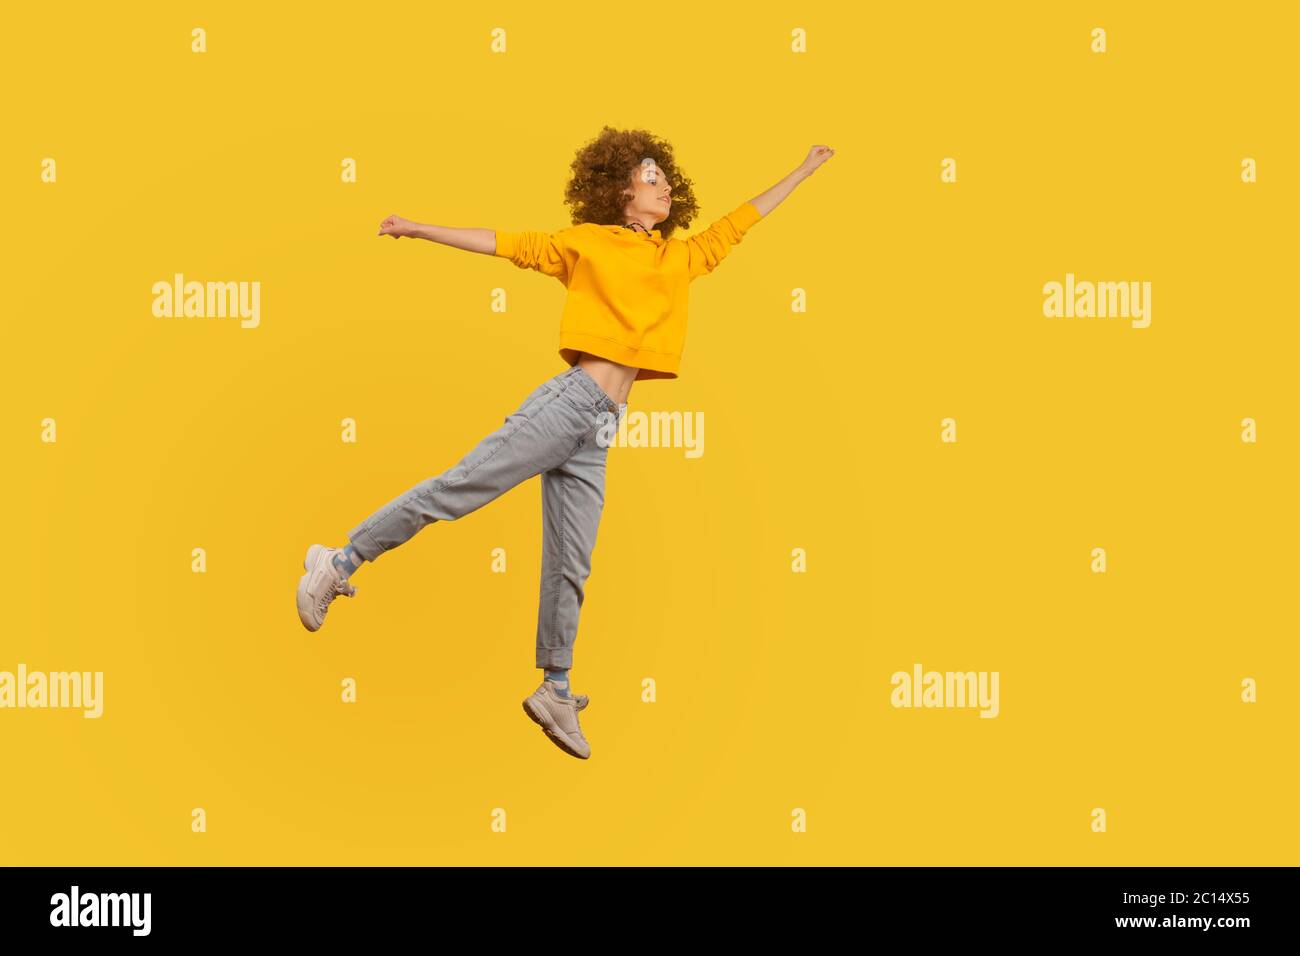 Portrait of superhero curly-haired girl in urban style outfit flying with raised hand high in air, feeling superpower and inspiration, achieving goal. Stock Photo